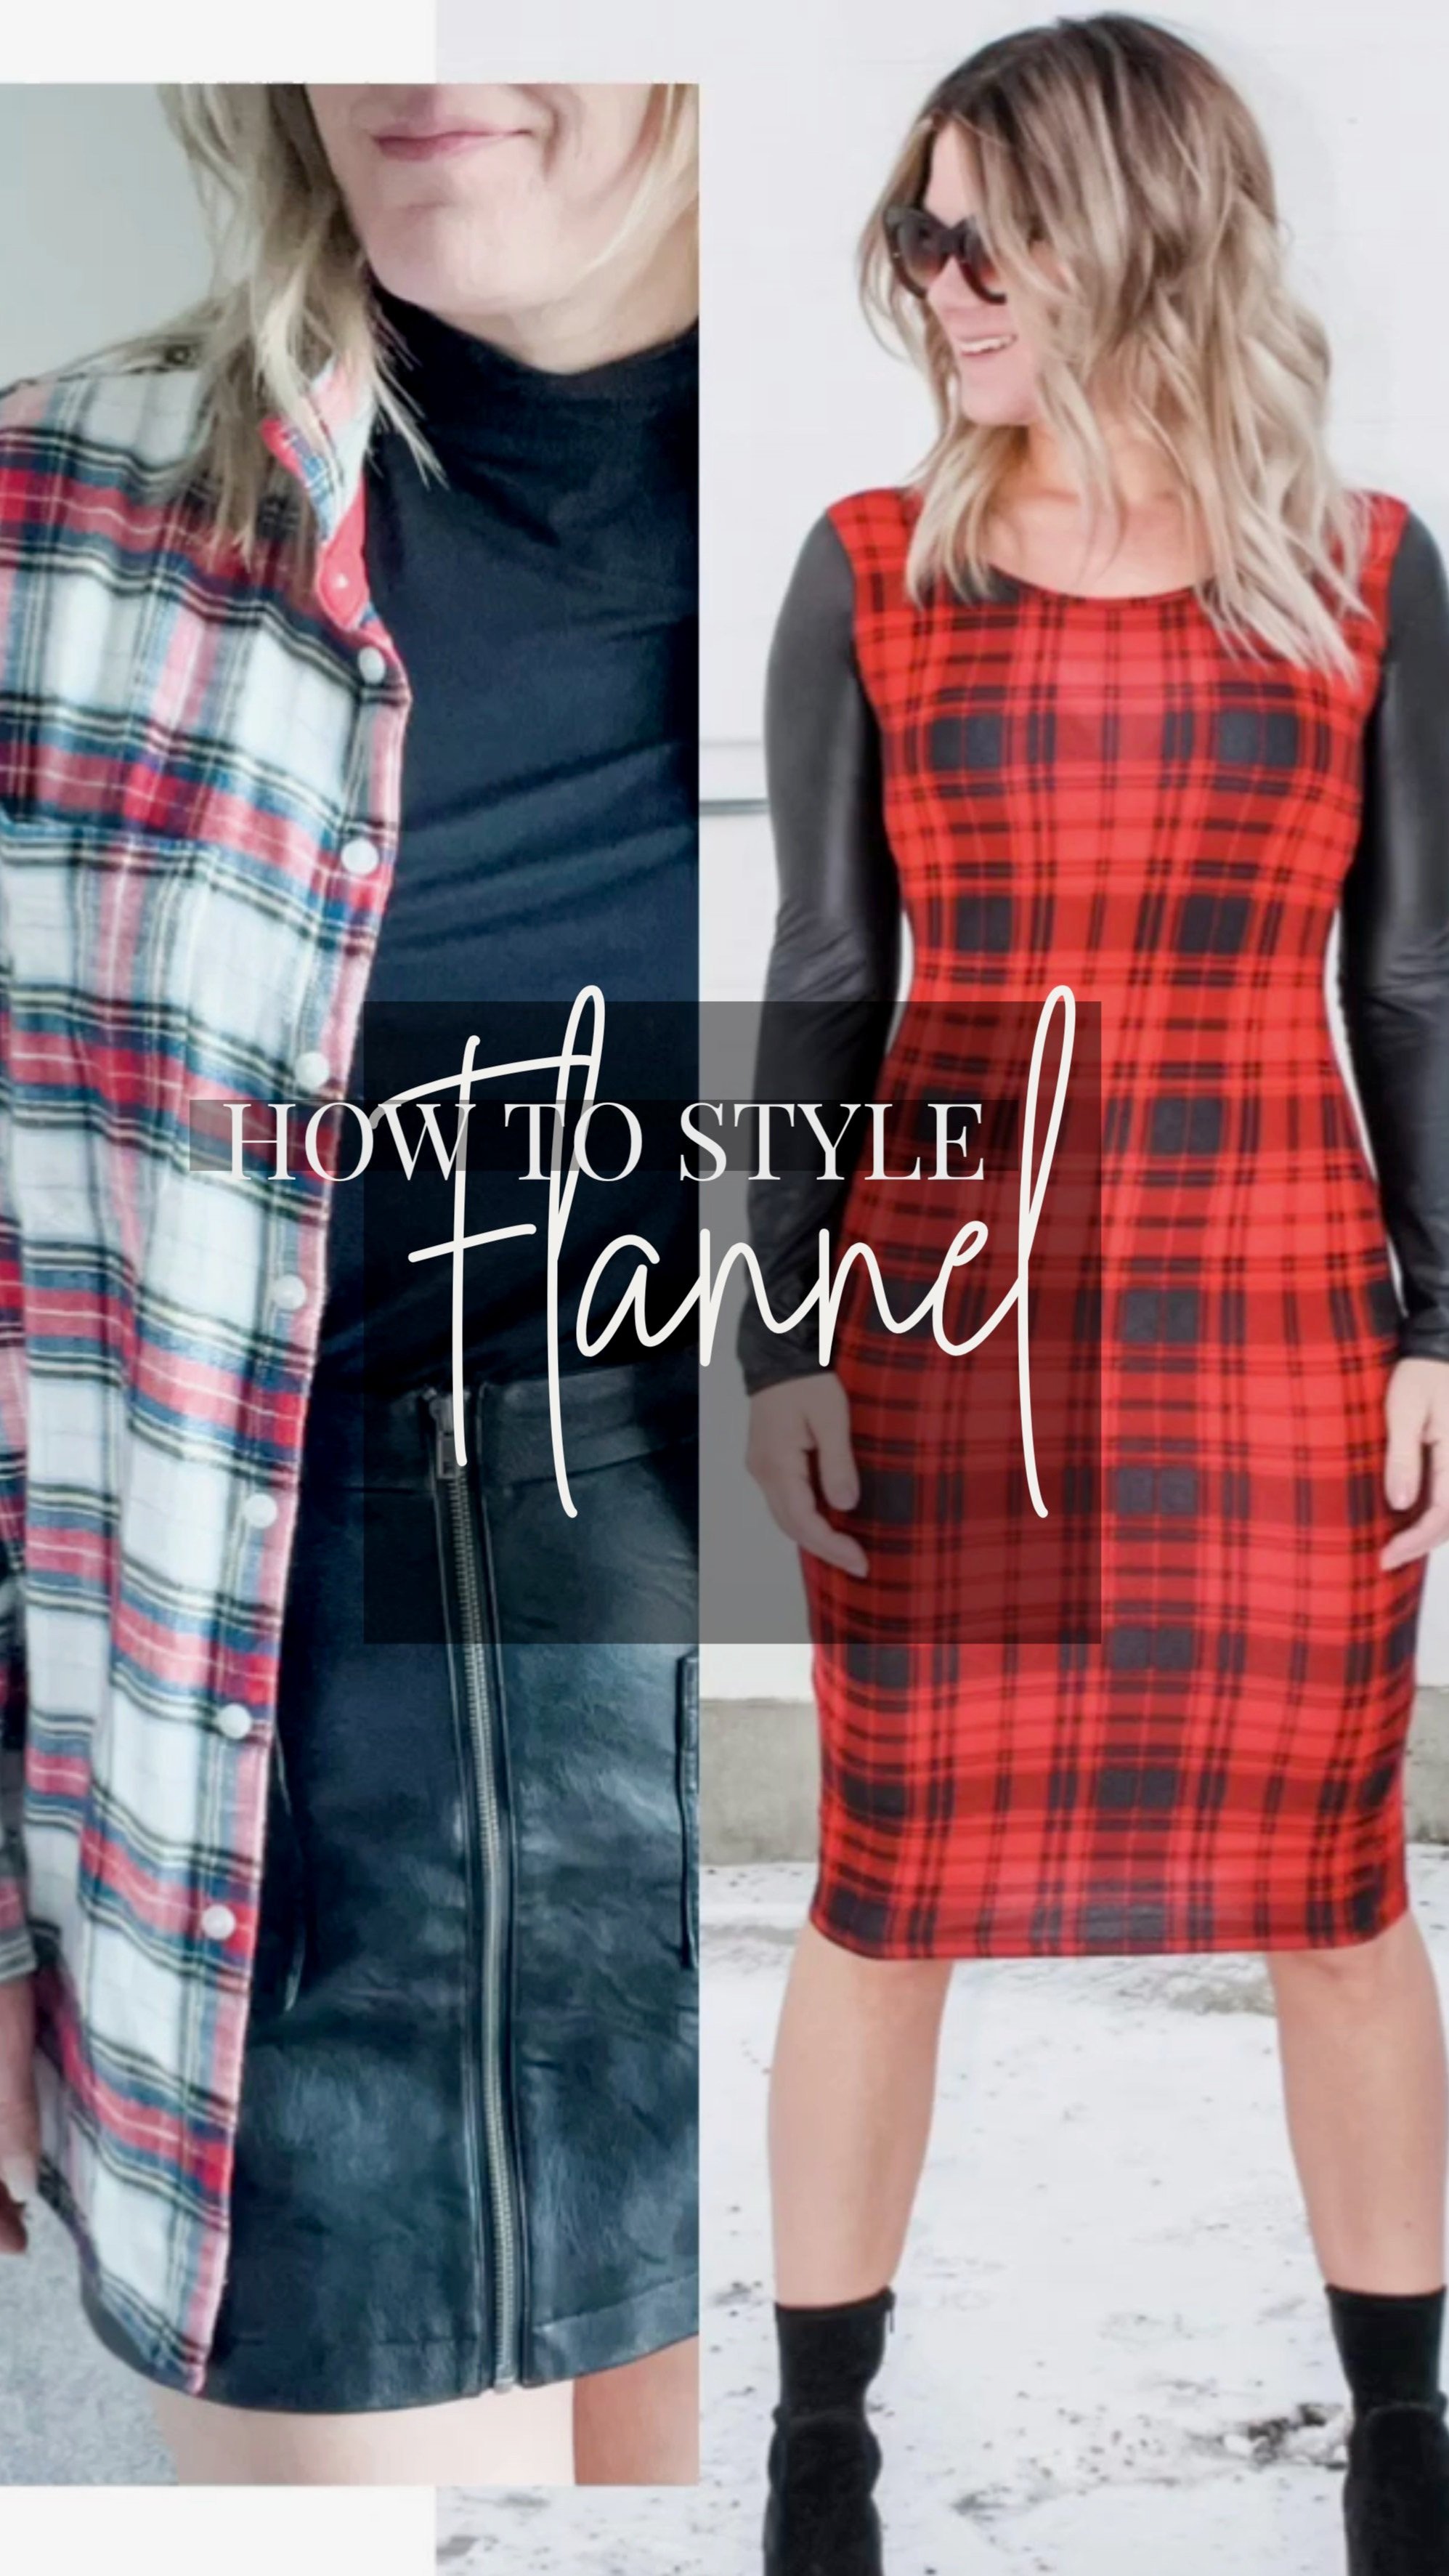 HI! LET'S GET STARTED WITH EXPLAINING WHAT IS FLANNEL: